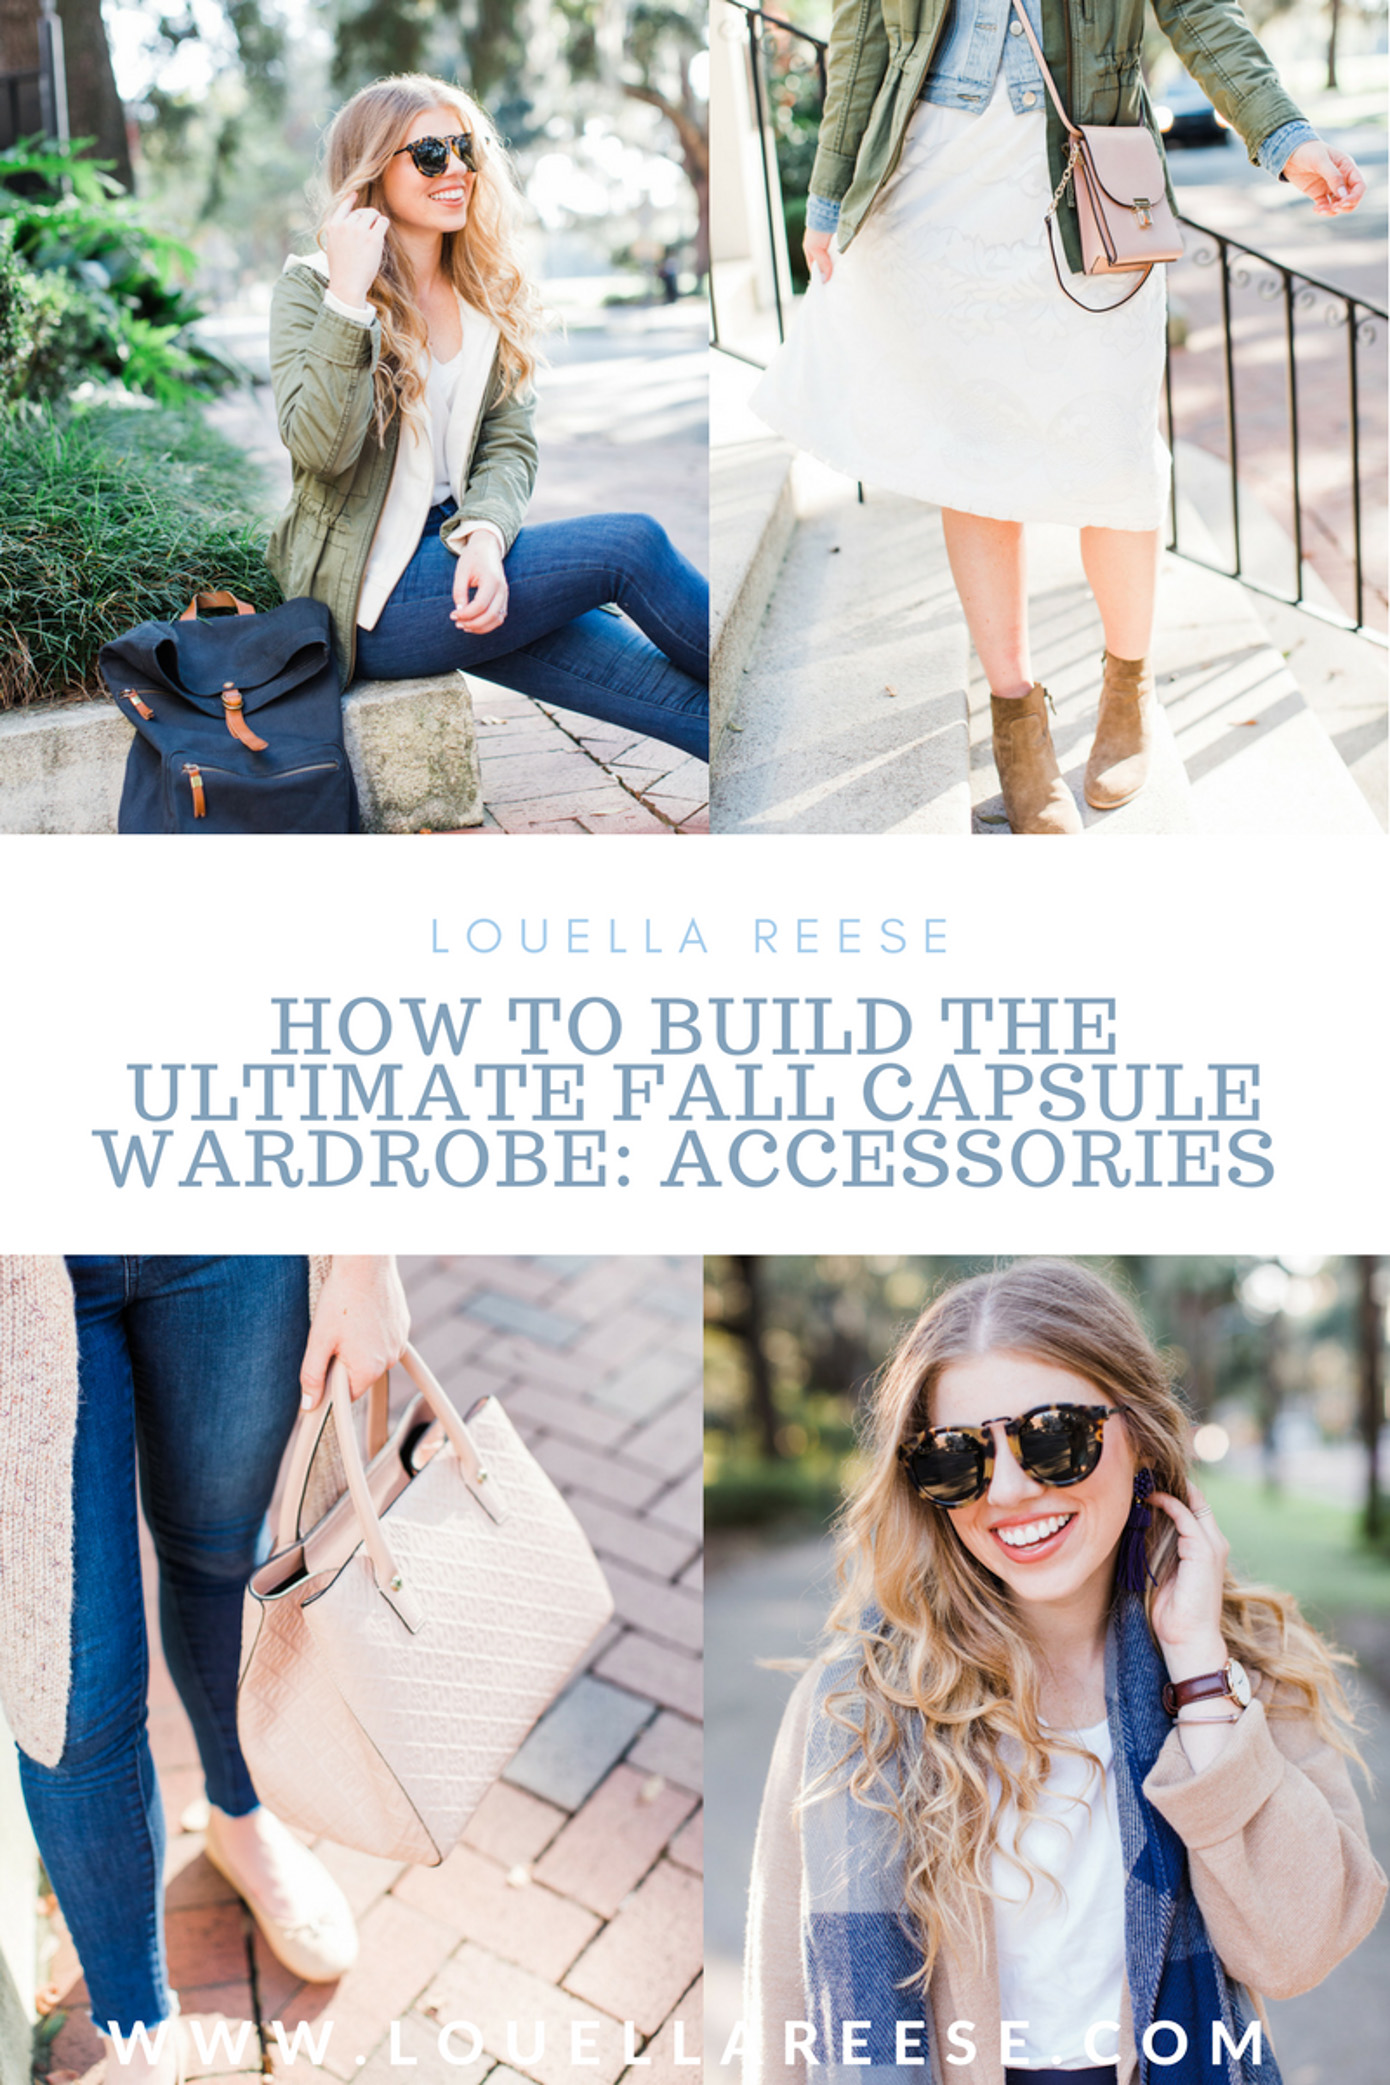 How to Build a Fall Capsule Wardrobe | Fall Capsule Wardrobe Accessories Check List | Louella Reese Life & Style Blog